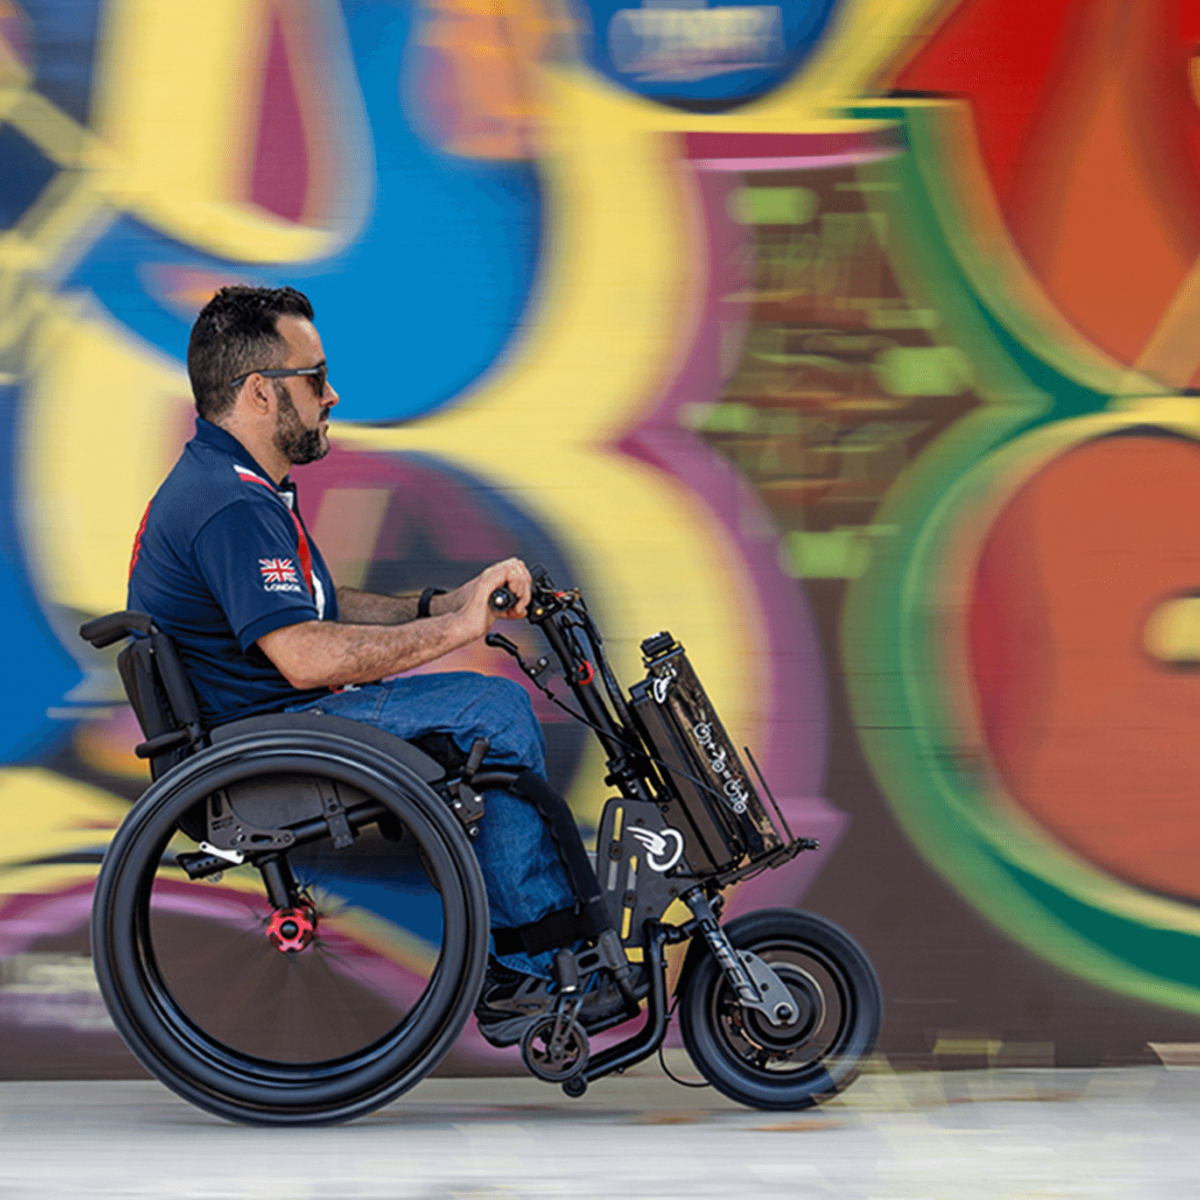 The picture shows a middle-aged man, wearing sunglasses, driving through a pedestrian zone on a summer day in his wheelchair with an auxiliary drive for self-propelled driving. The add-on drive is black and installed in the wheels as a wheel hub drive.